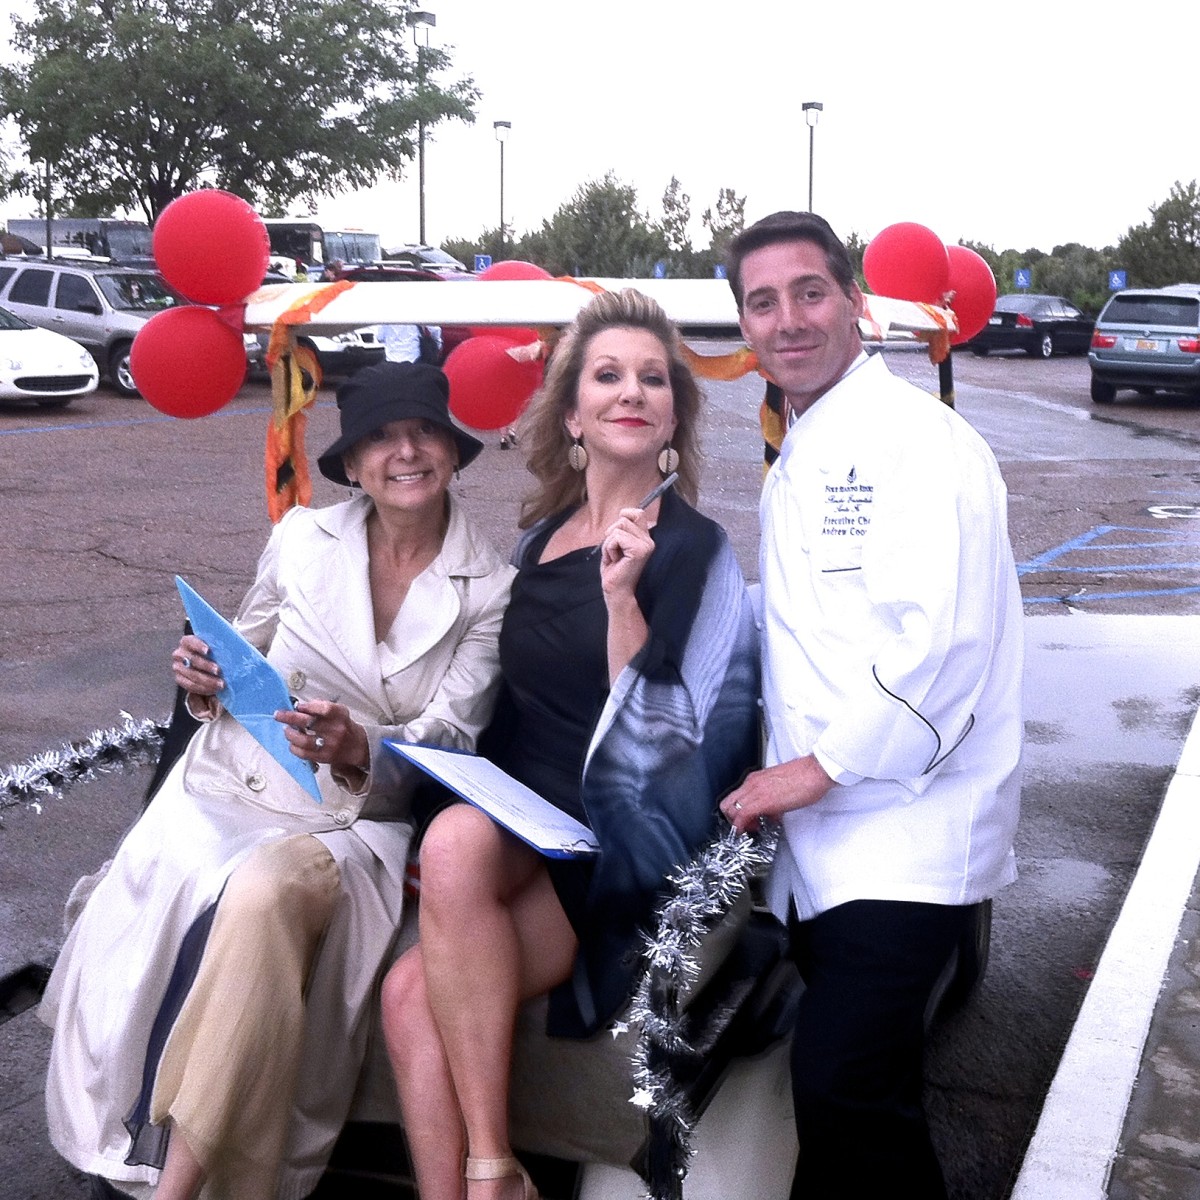 Opening night of the Santa Fe Season, I was one of the judges for the famous tailgate parties.  I am not at all sure how much judging actually happened, but I had a wonderful time with the team, just missing the rainstorm!